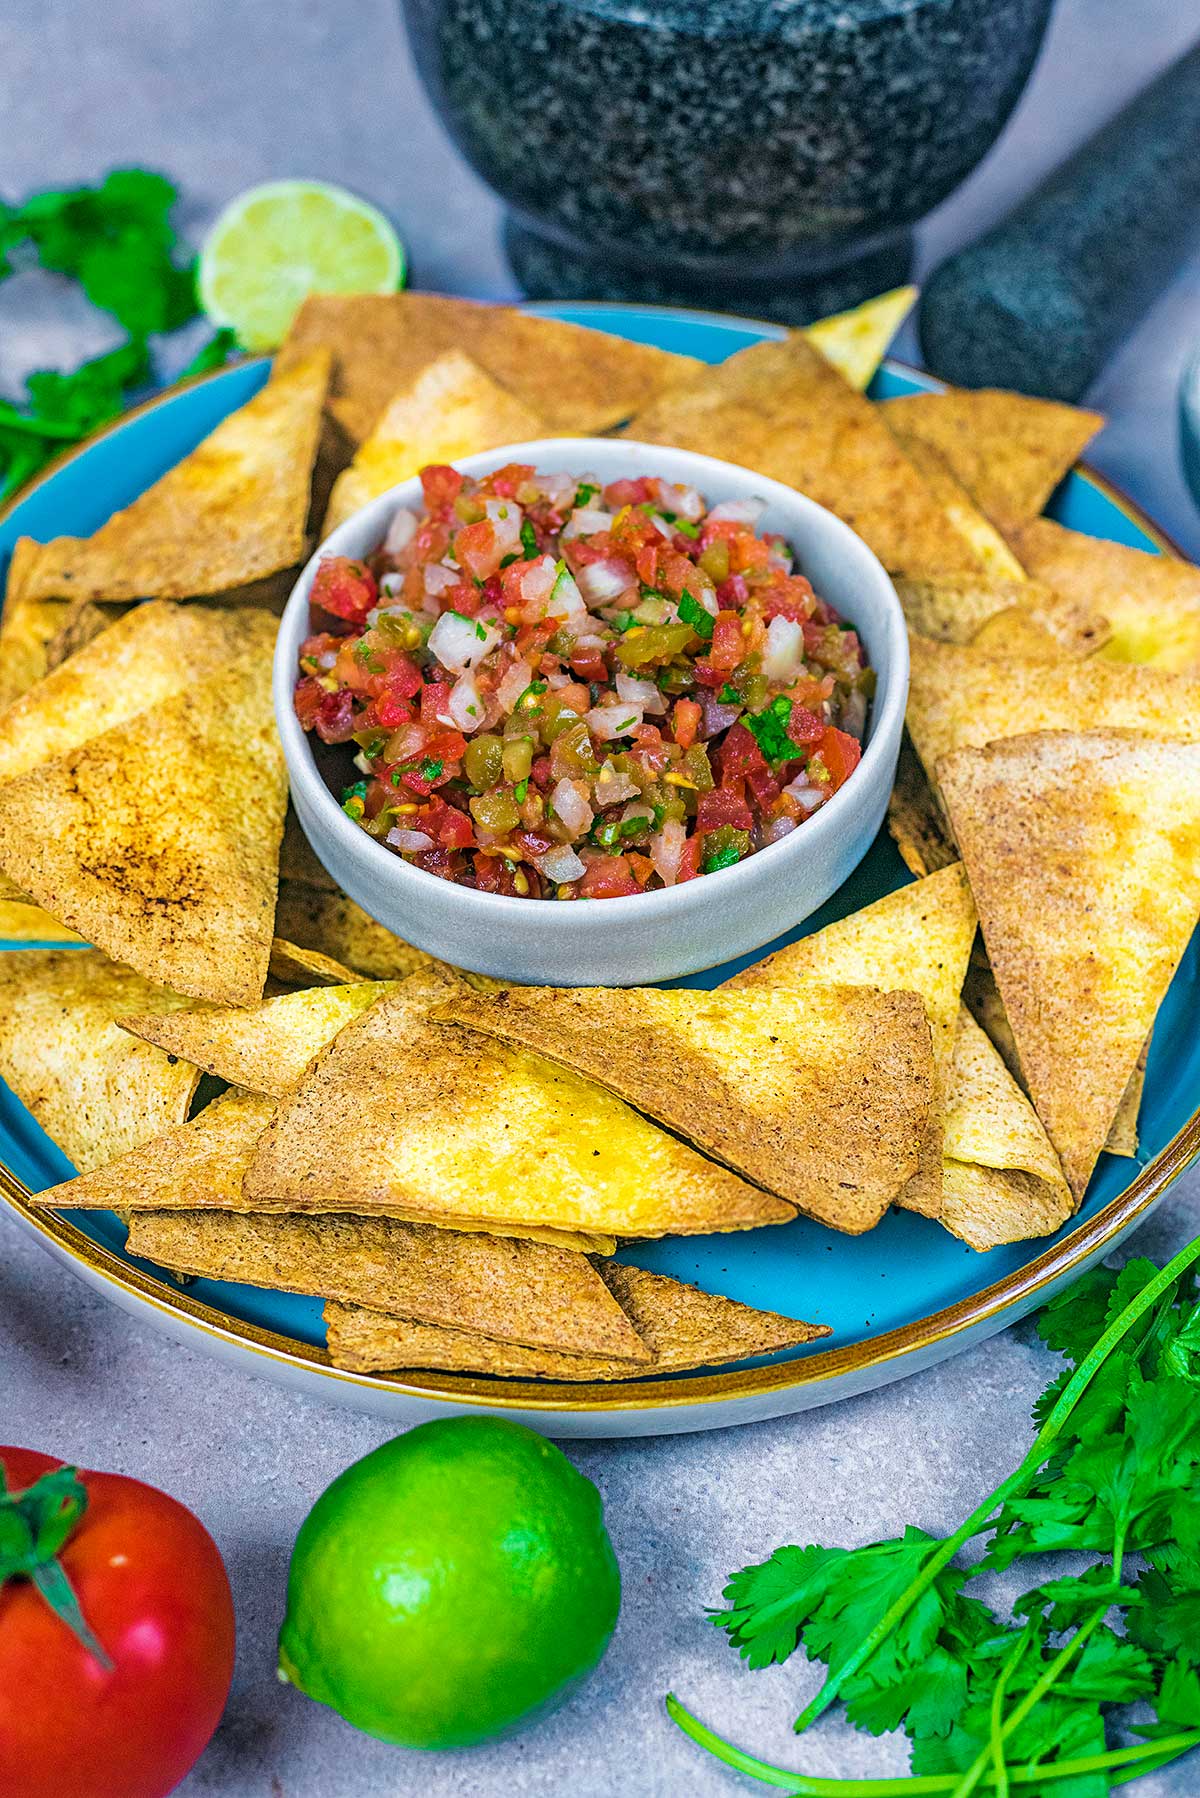 A plate of tortilla chips and salsa next to some limes and tomatoes.